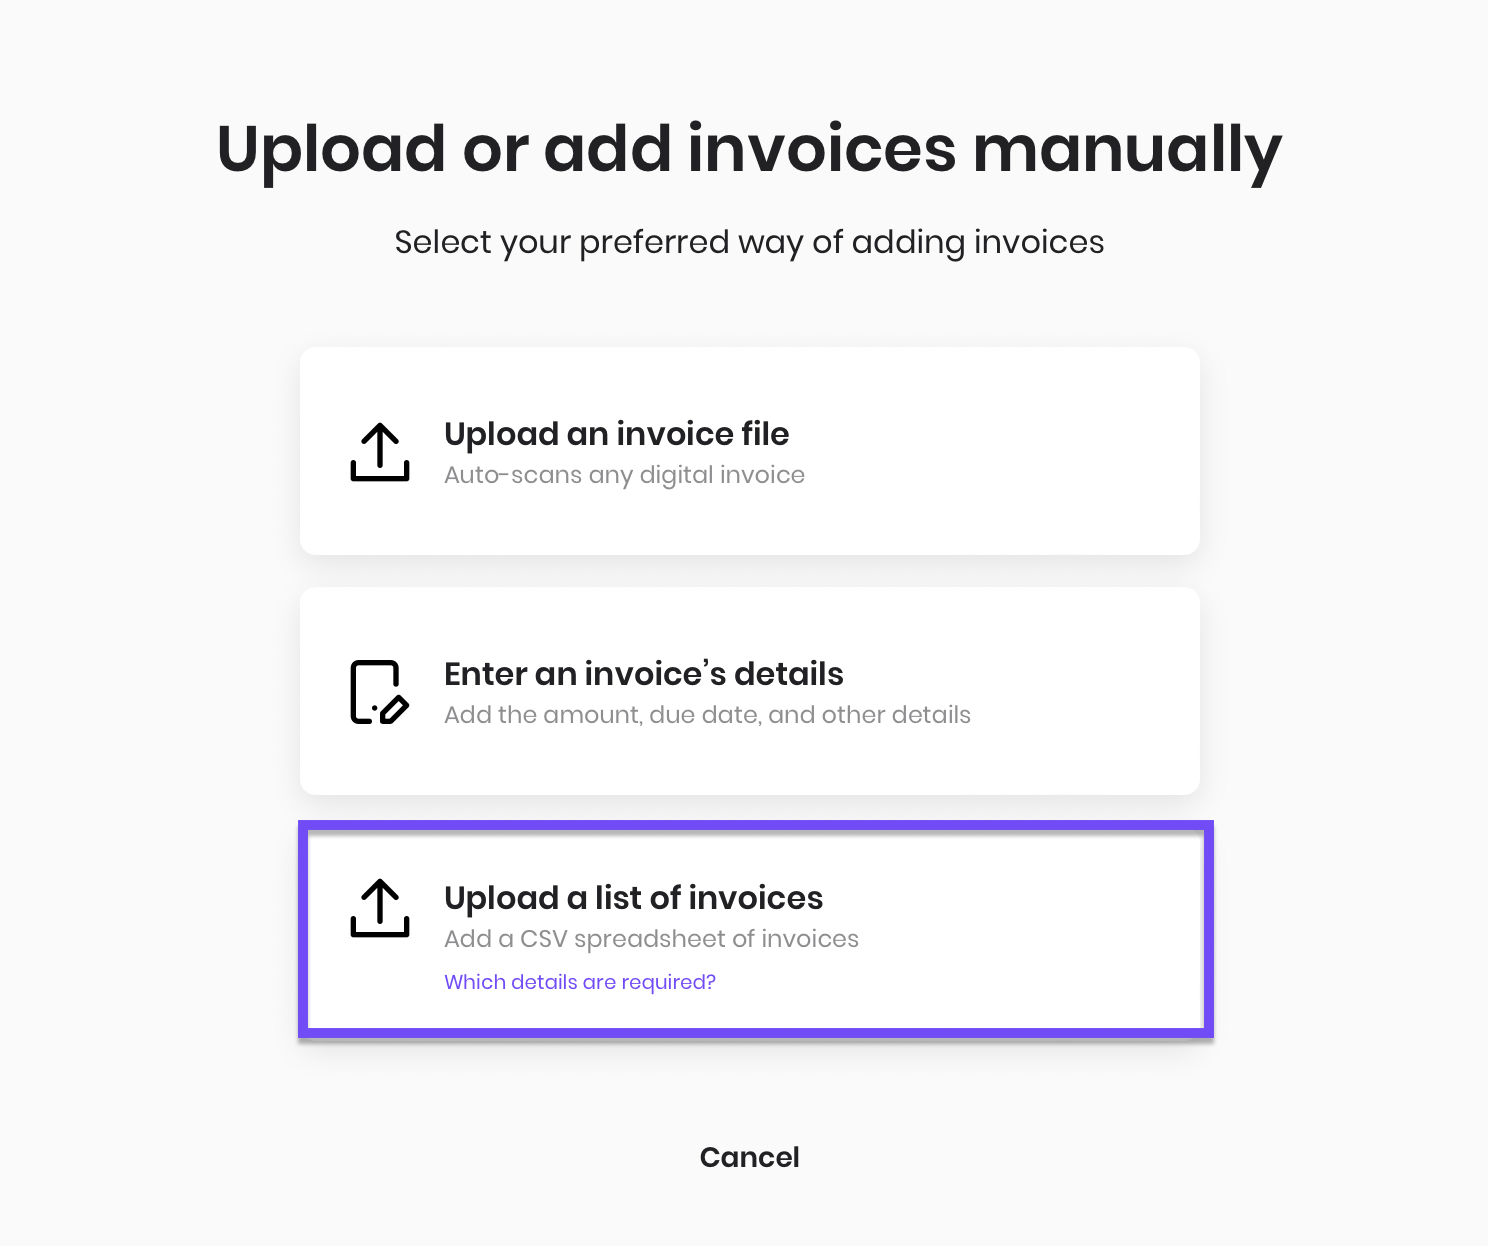 upload_a_list_of_invoices.png